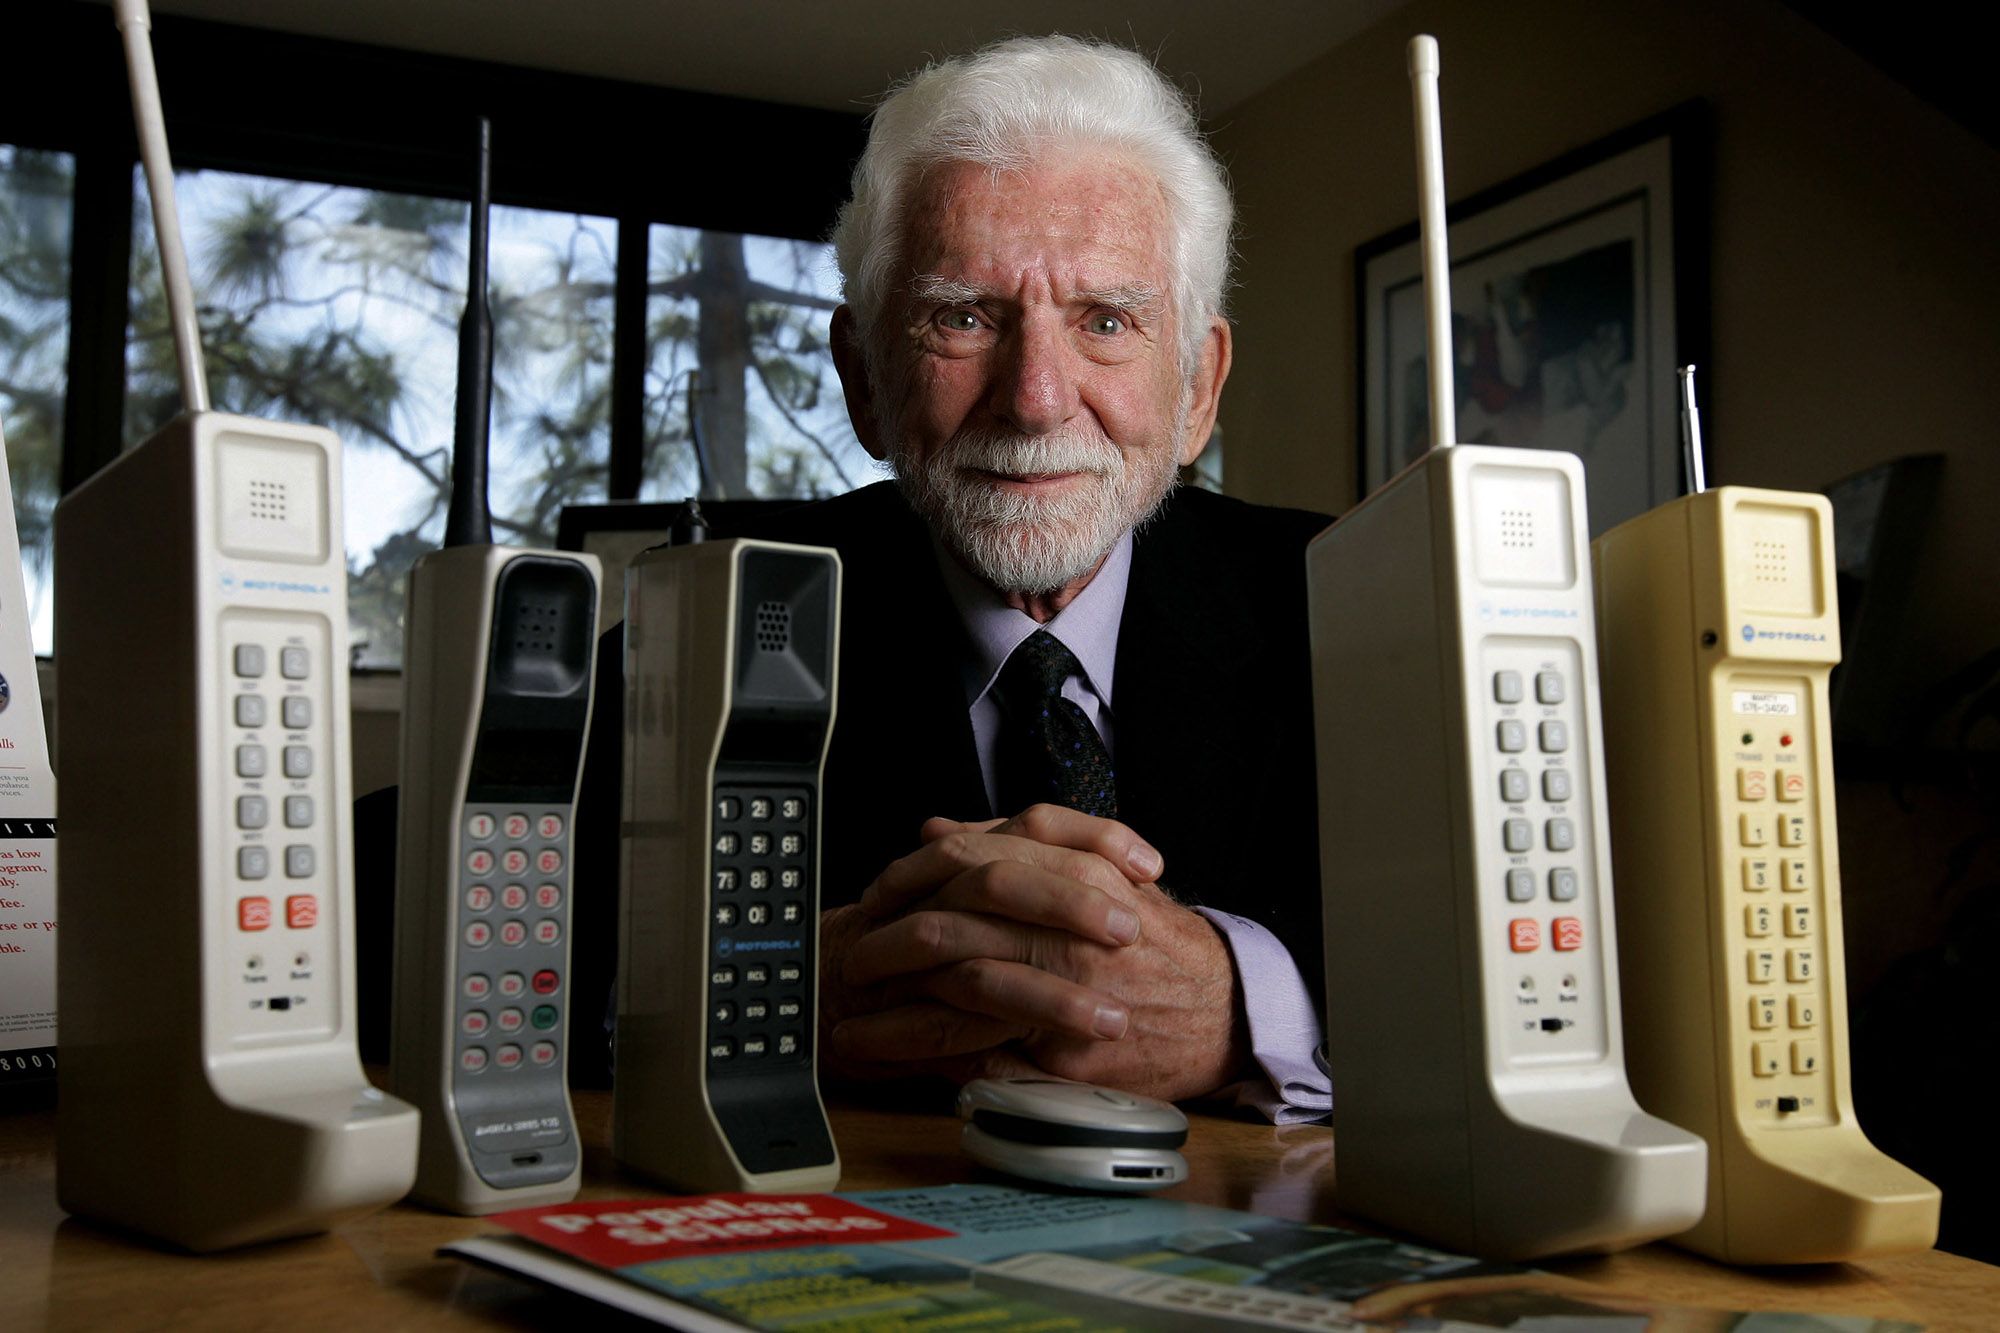 first mobile phone invented 1973